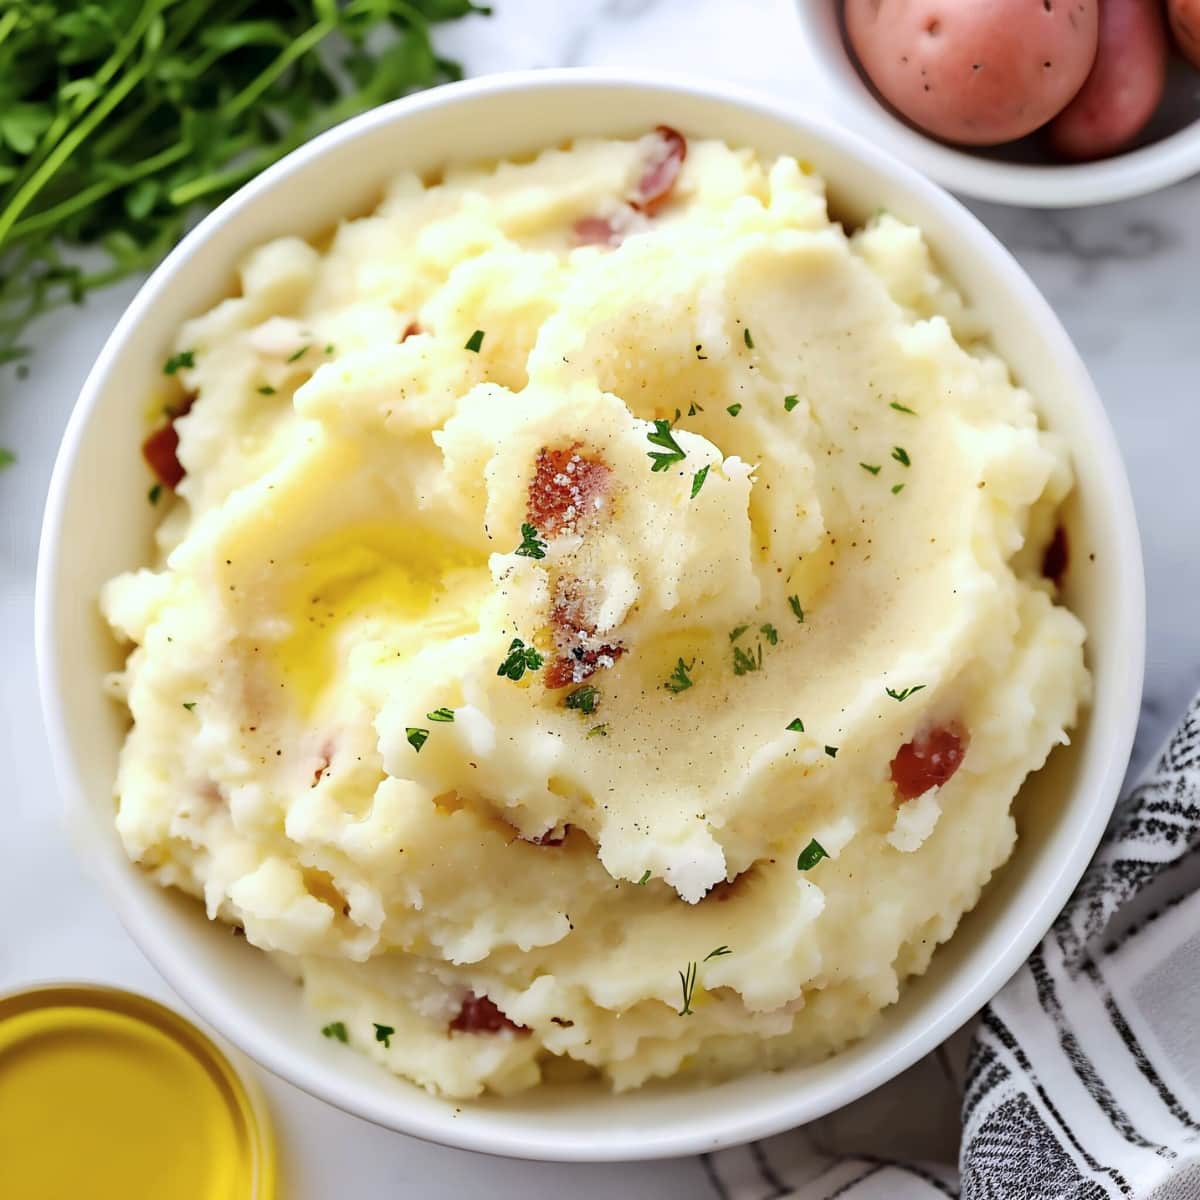 Bowl of homemade mashed red potatoes with bacon and herbs